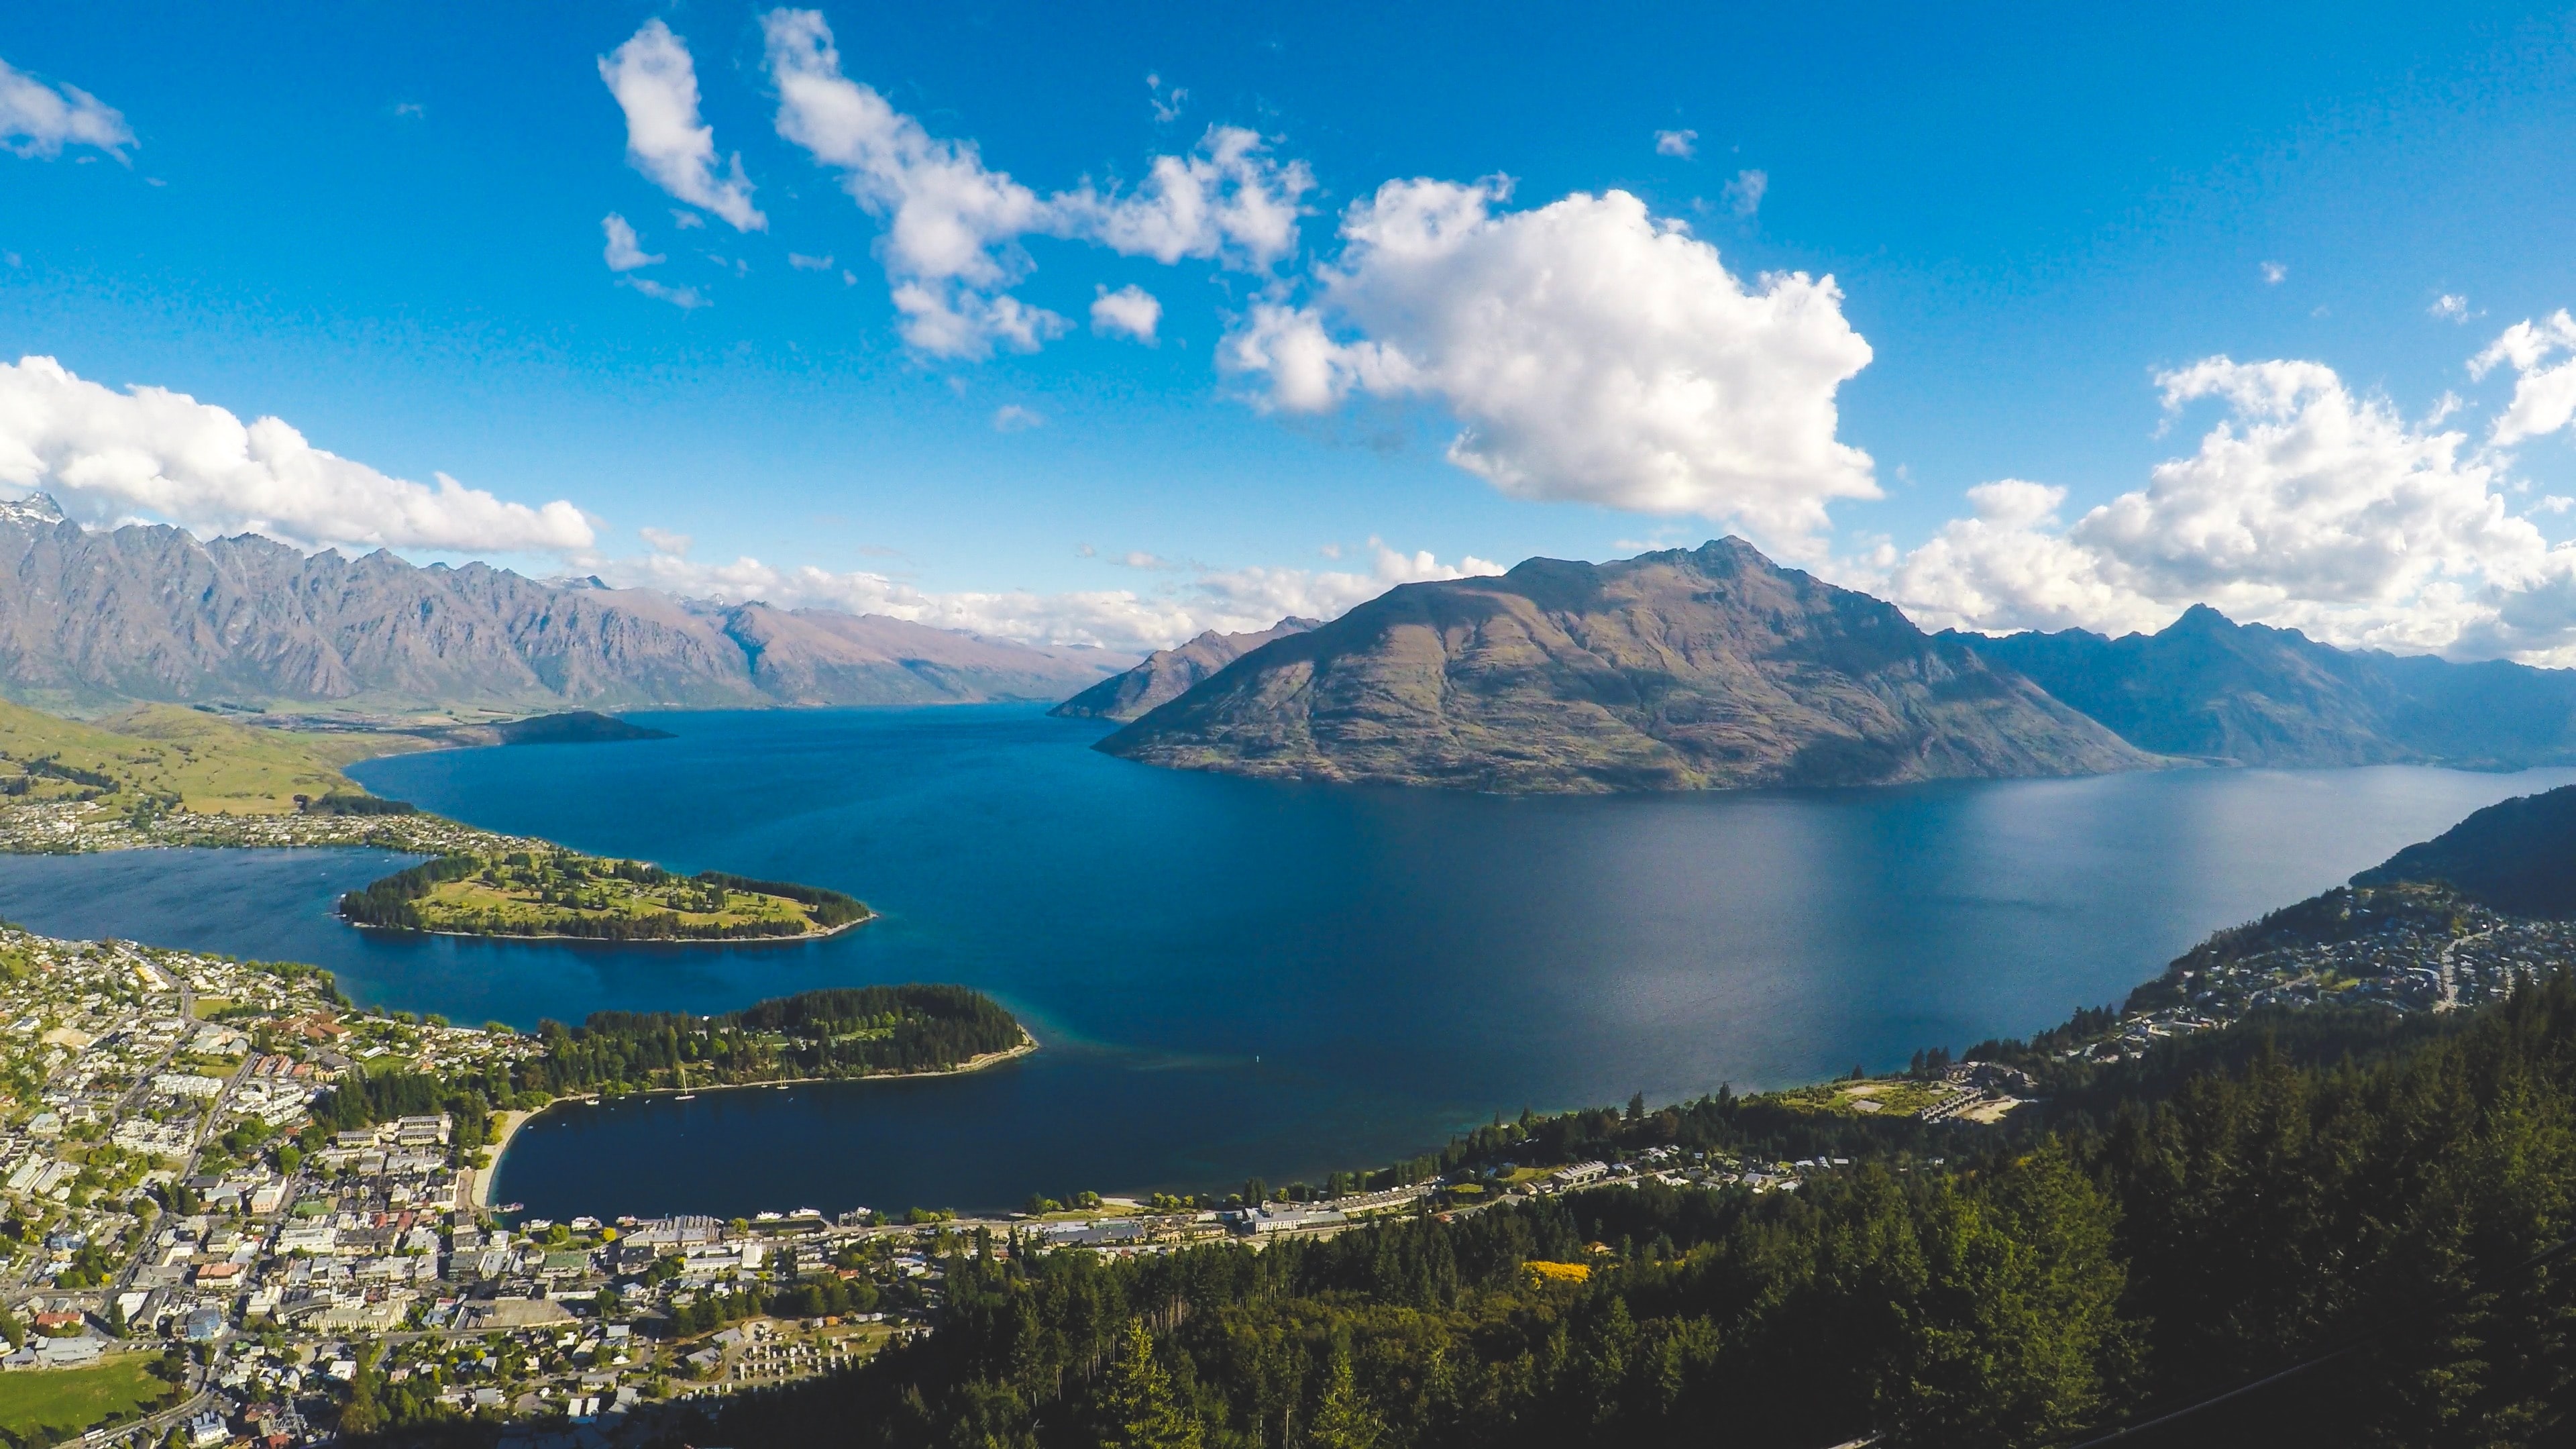 Queenstown, New Zealand relocation, Moving to paradise, Sirelo's guide, 3840x2160 4K Desktop